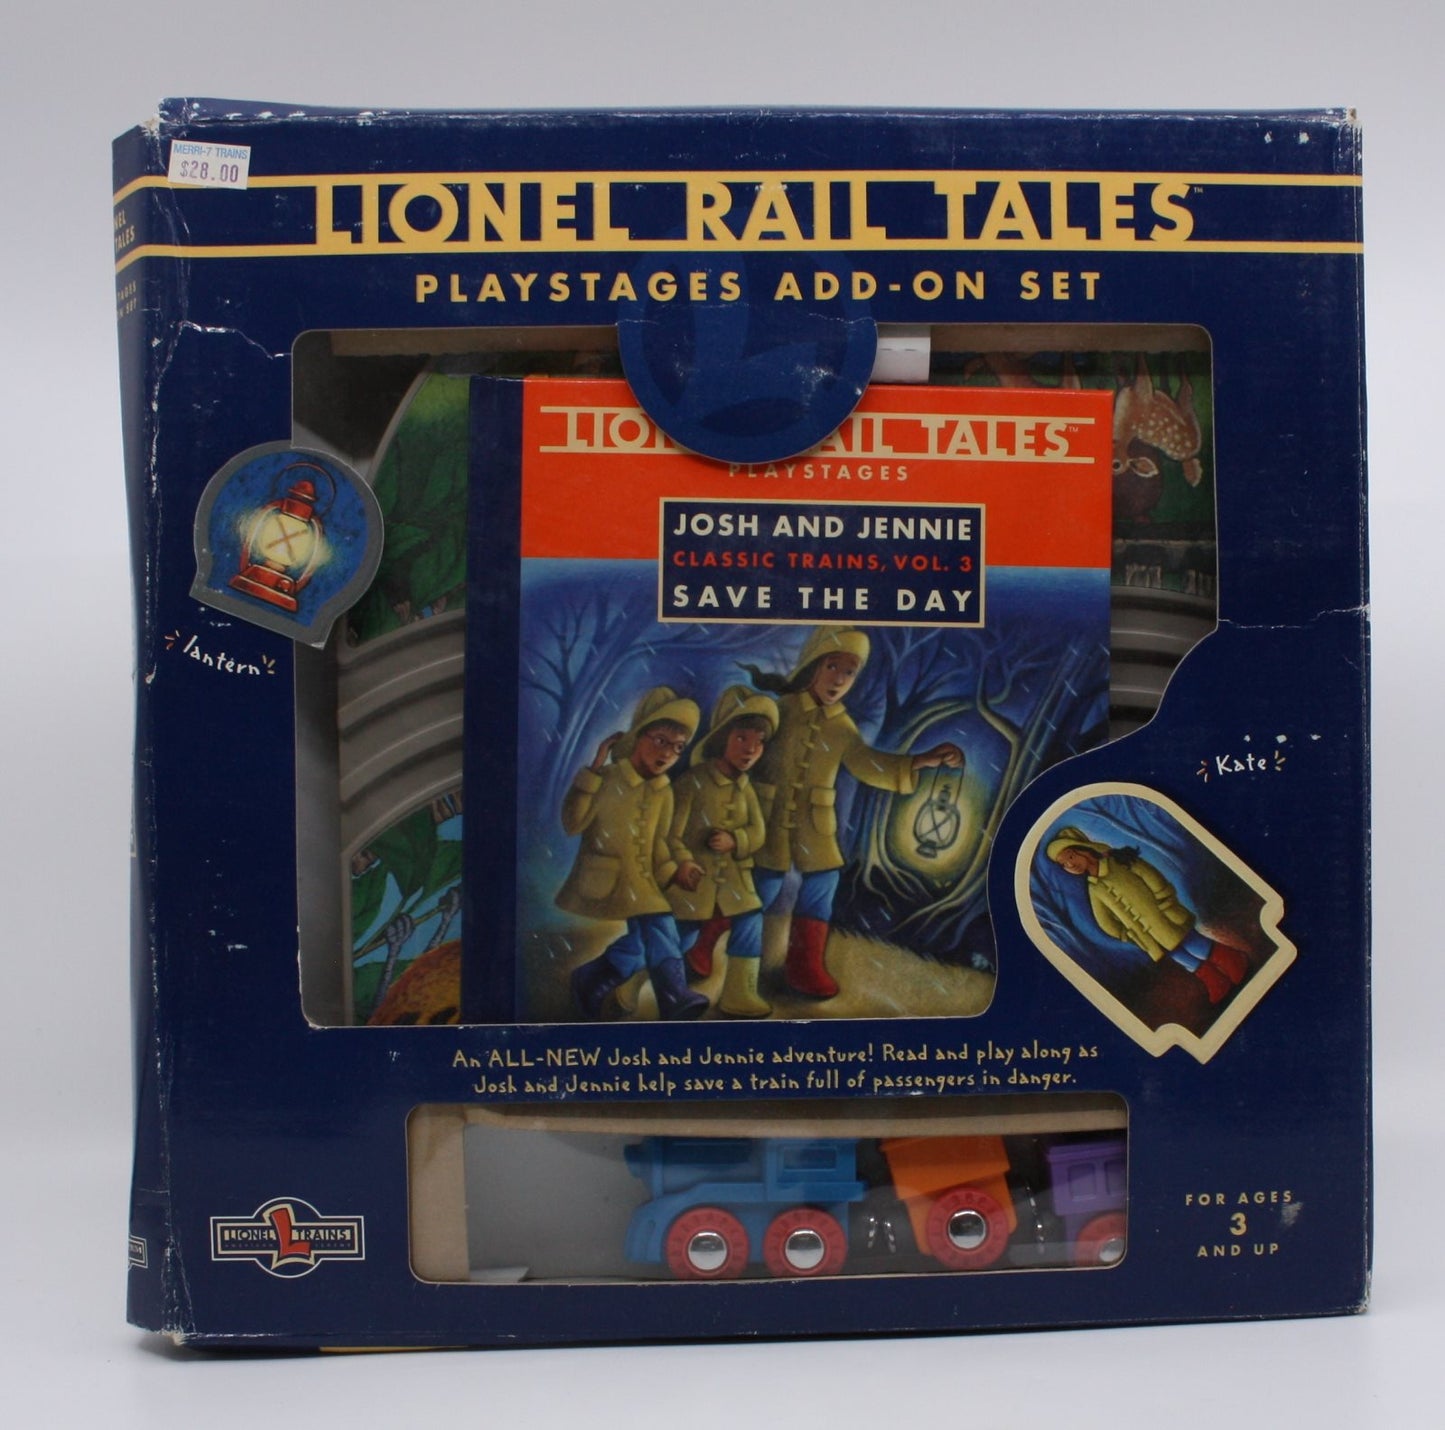 Lionel Rail Tales Playstages Add-on Set Josh and Jennie Save the Day Vol. 3